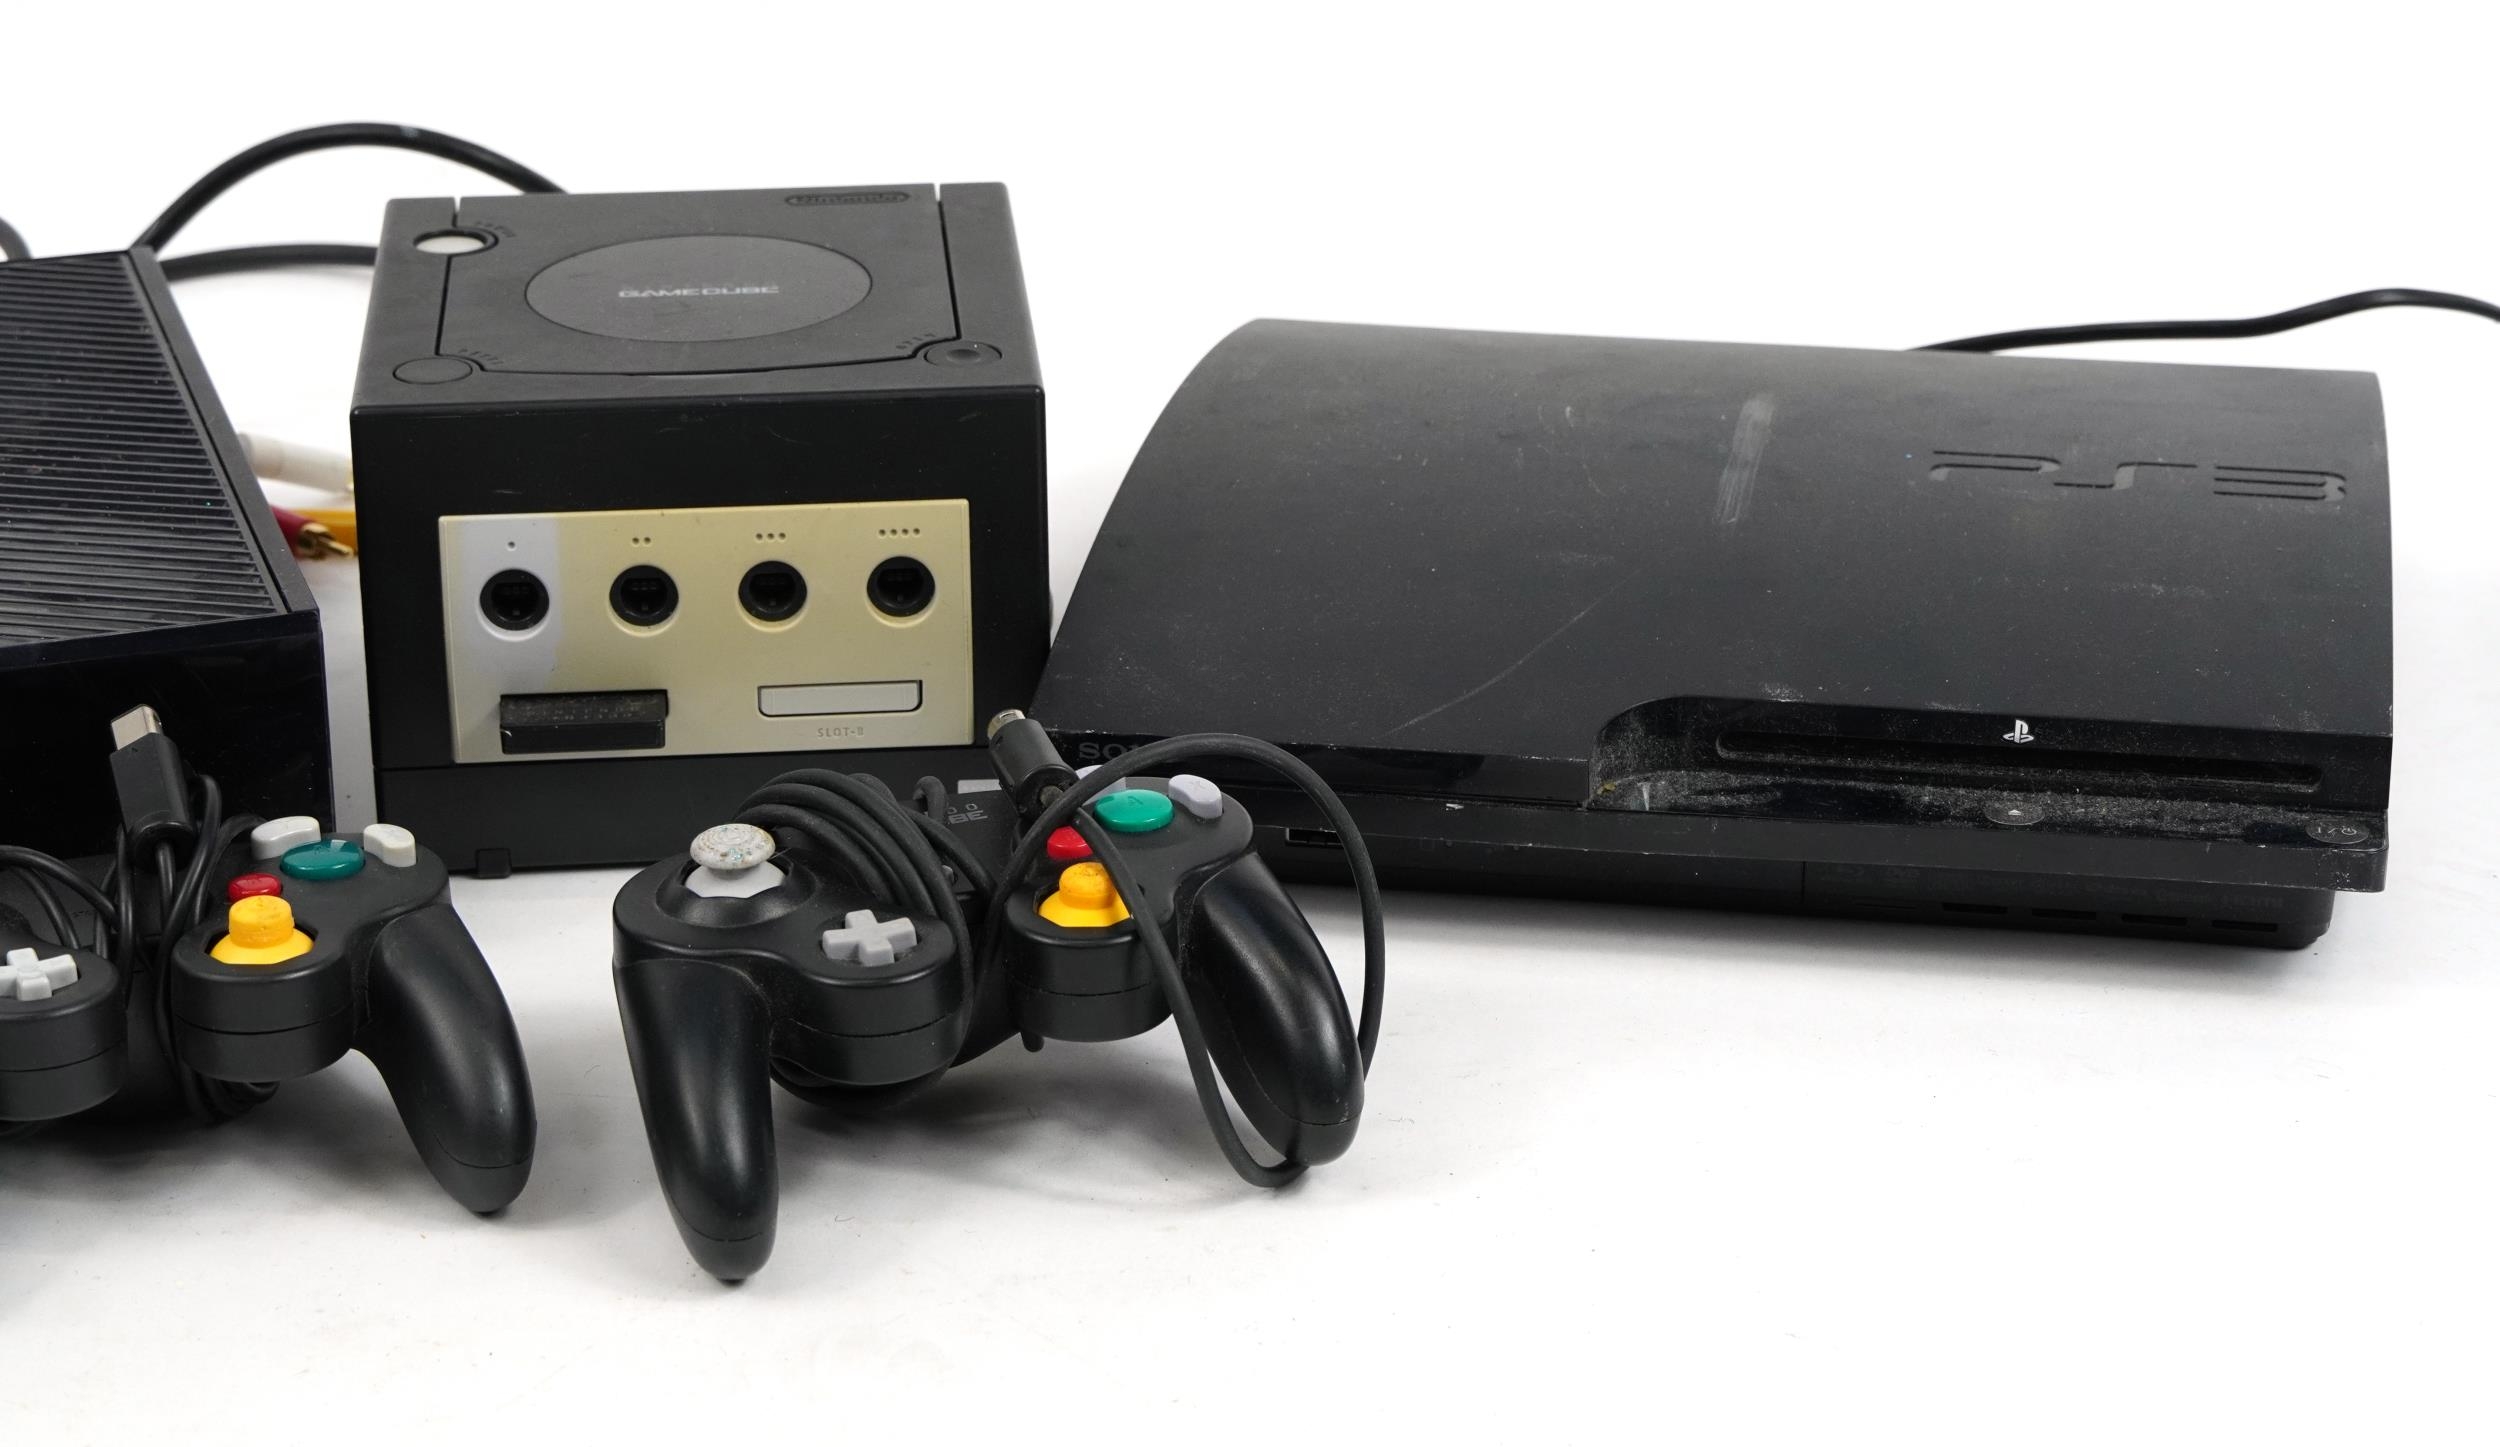 Three games consoles with controllers comprising Play Station 3, Nintendo Gamecube and Xbox - Image 3 of 3